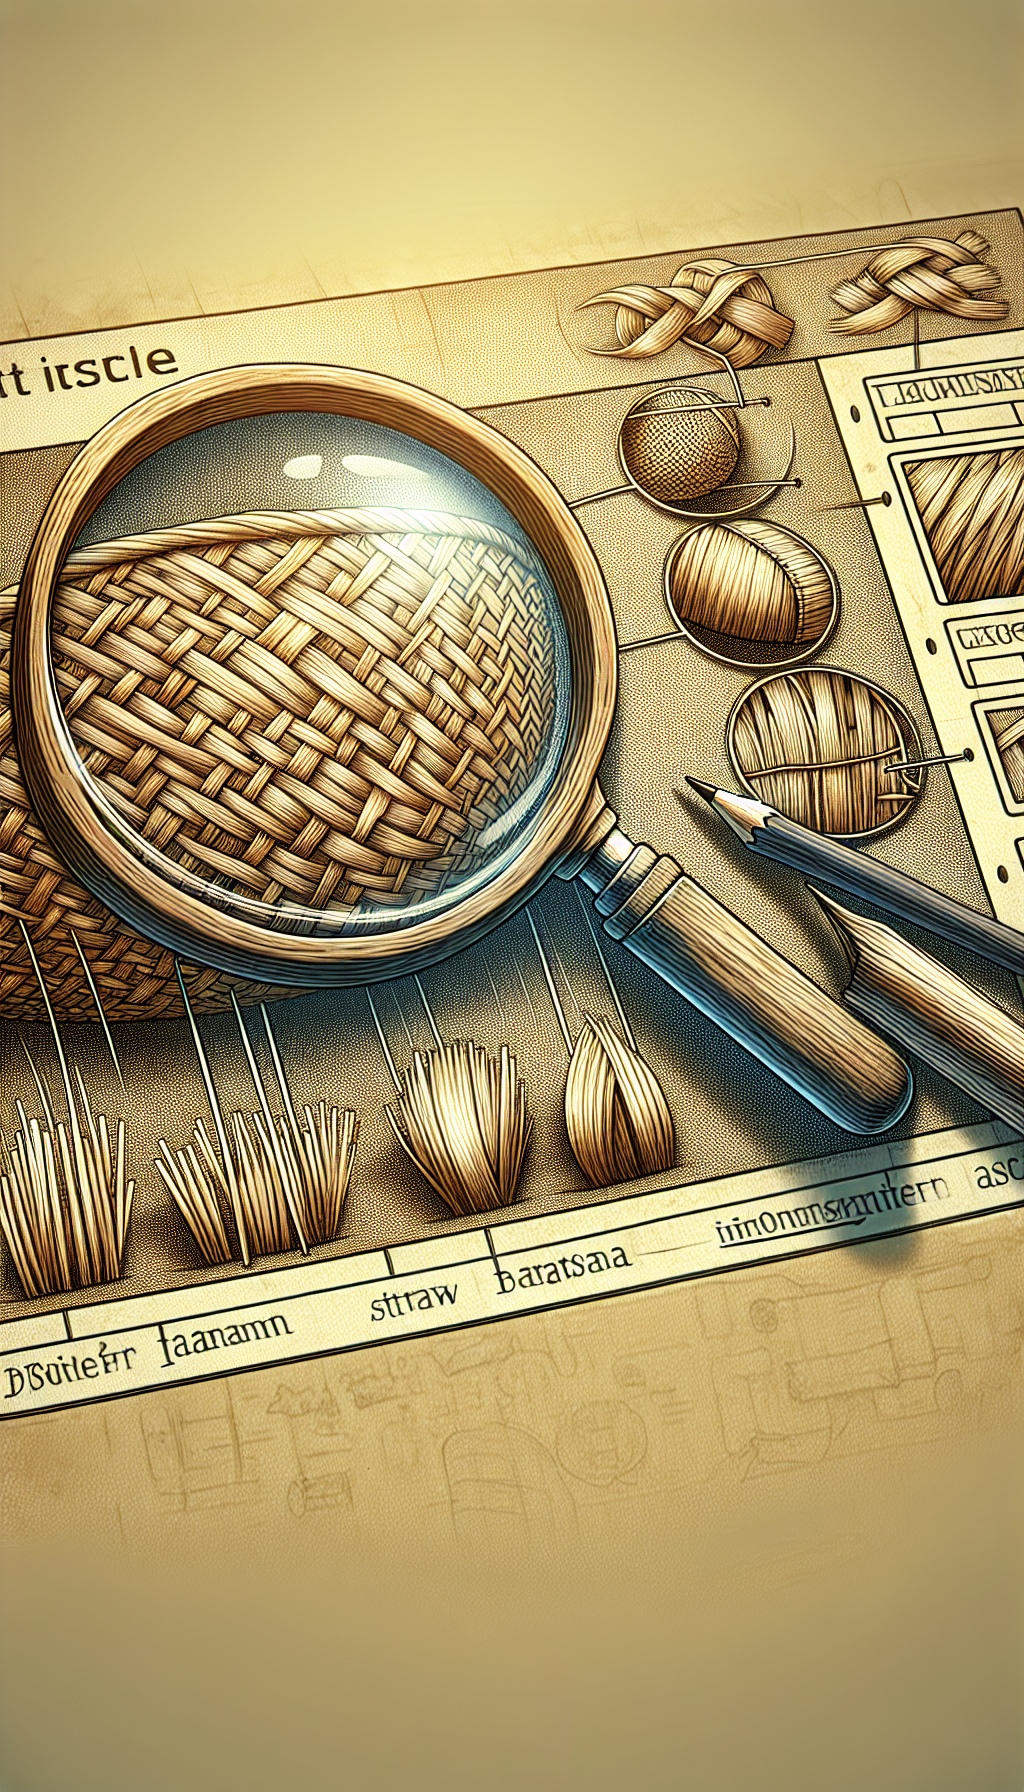 An illustration that merges a magnifying glass peering into the intricate weave of an antique basket with fibers transforming into informative tags, labeling the materials such as "wicker," "straw," and "bamboo." These tags subtly morph into a timeline beneath the basket, hinting at historical periods and styles, aiding identification. The image seamlessly blends photorealistic textures with hand-drawn historical motifs.